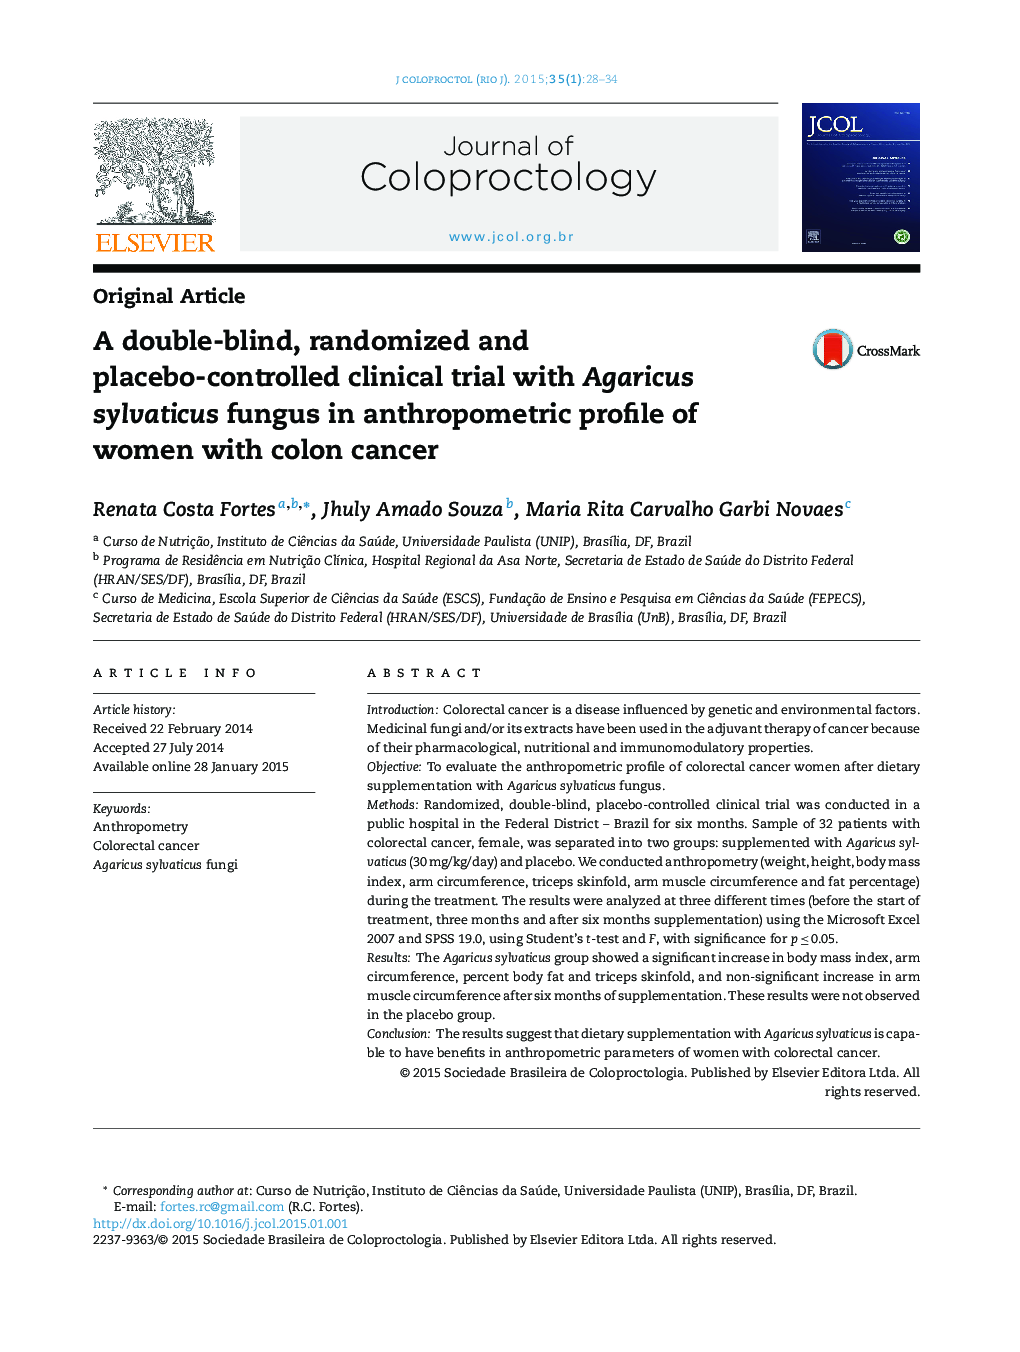 A double-blind, randomized and placebo-controlled clinical trial with Agaricus sylvaticus fungus in anthropometric profile of women with colon cancer